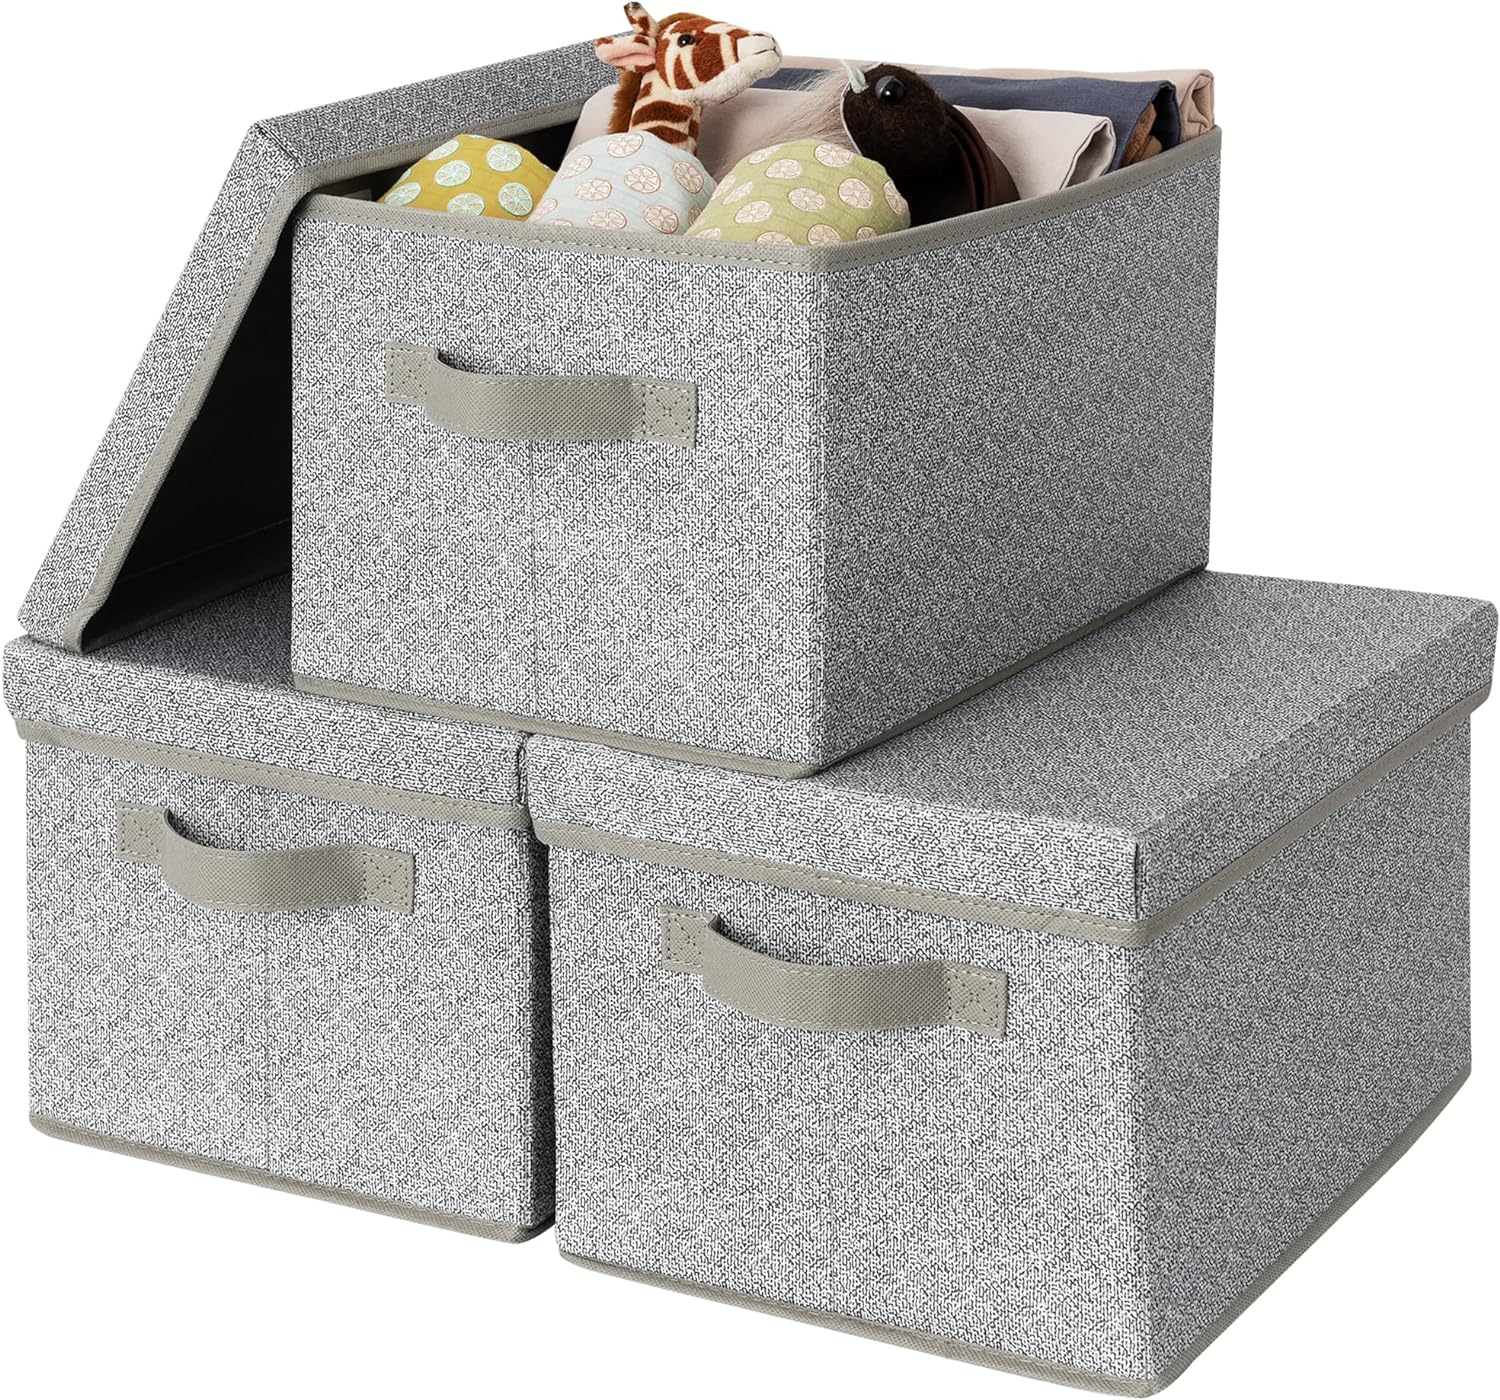 GRANNY SAYS Fabric Large Storage Bins with Lids, Collapsible Storage Box Closet Shelf, Decorative Baskets for Organizing Bedroom Dorm Nursery, Gray, 3-Pack